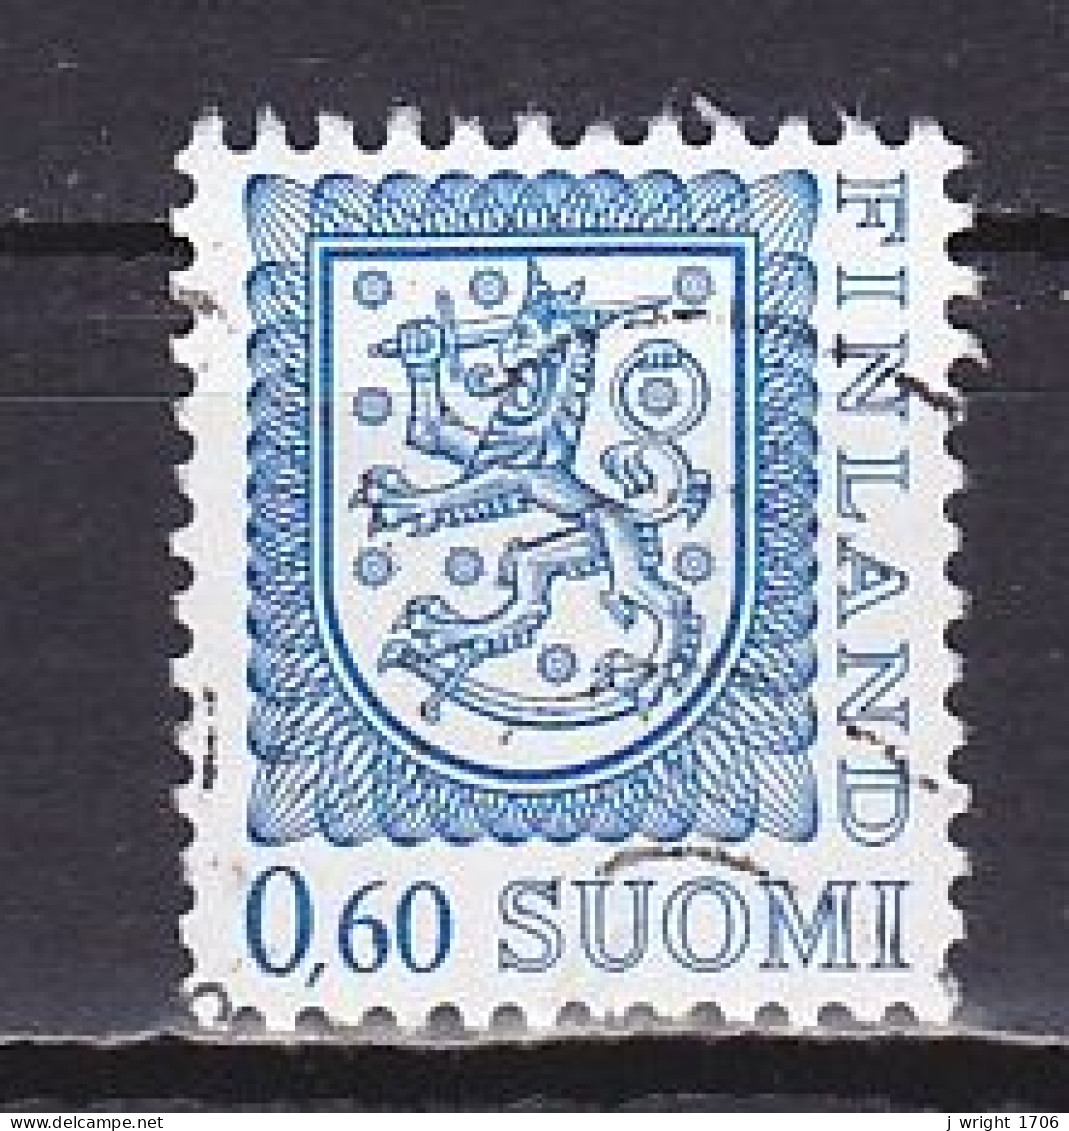 Finland, 1975, Coat Of Arms, 0.60mk, USED - Usati